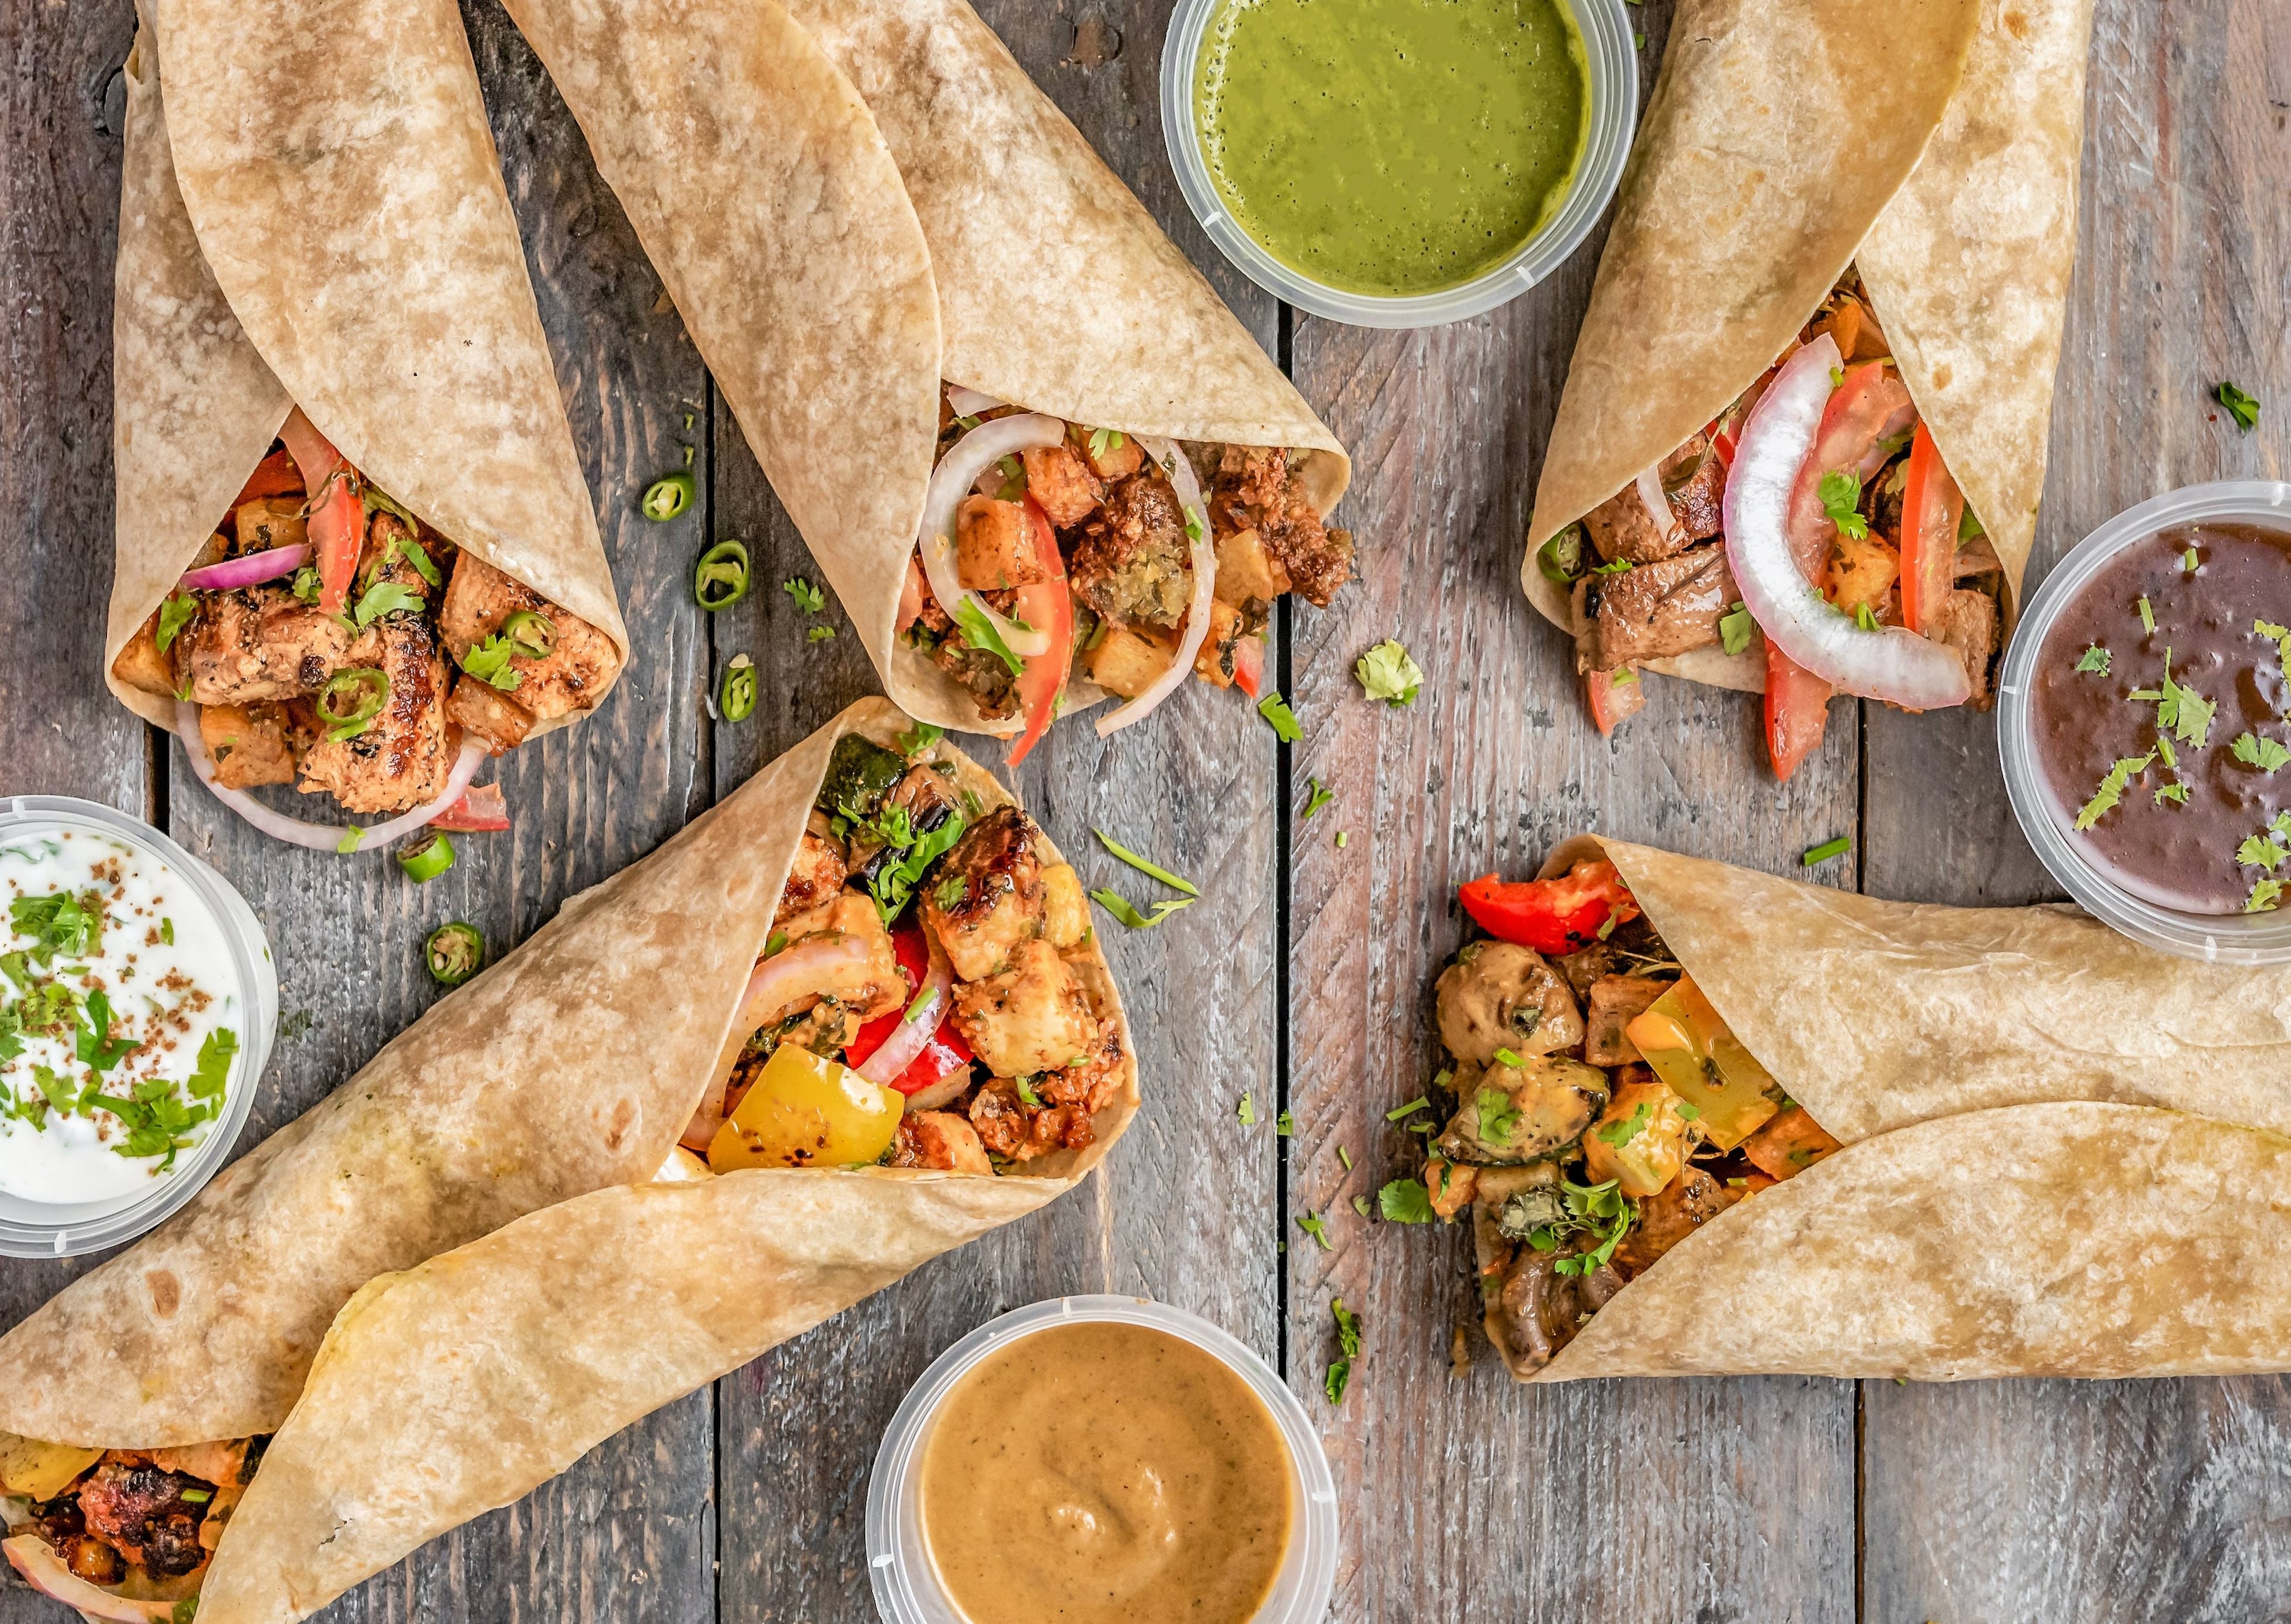 On-the-Go Bites with These Customizable Burrito Recipes